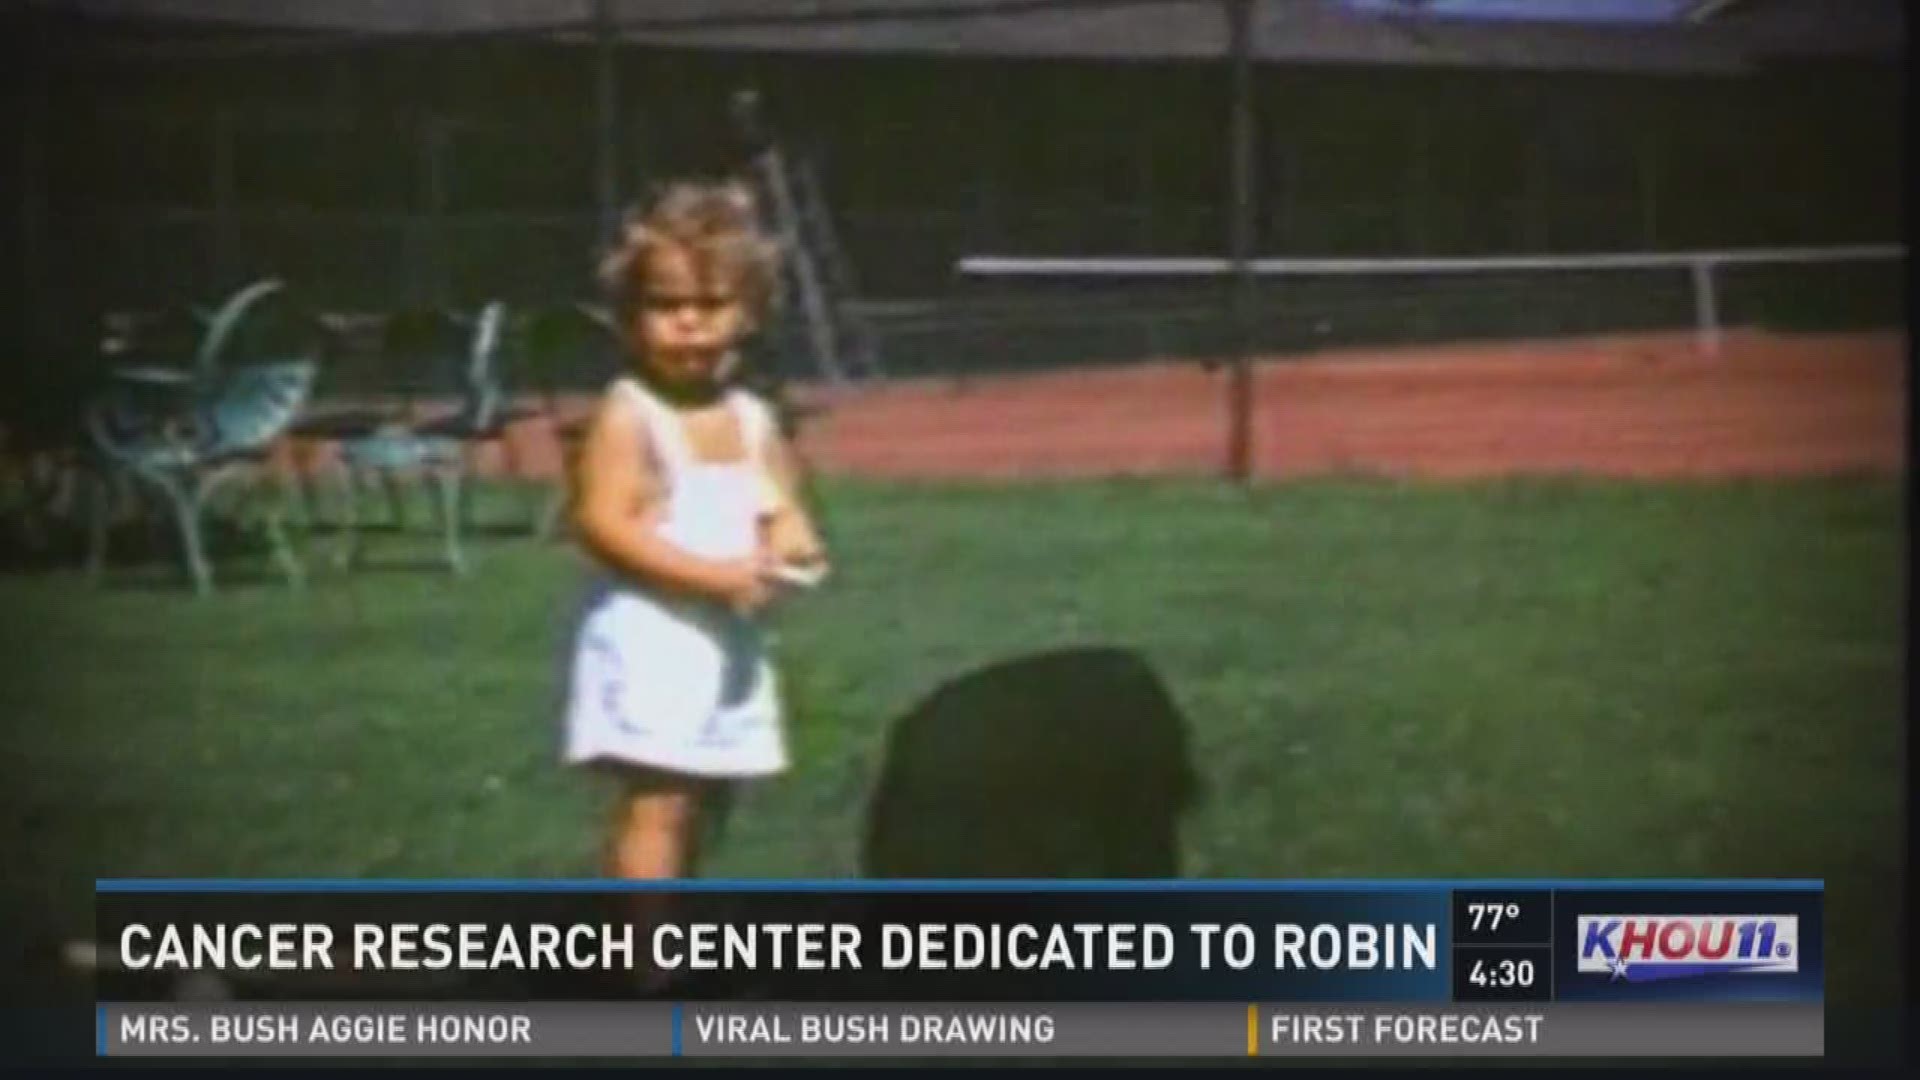 Barbara Bush's legacy will live on through the thousands of lives she touched, including childhood cancer patients like her late daughter Robin. Robin Bush would've been 68 years old today if leukemia hadn't ended her life at the age of 3. 